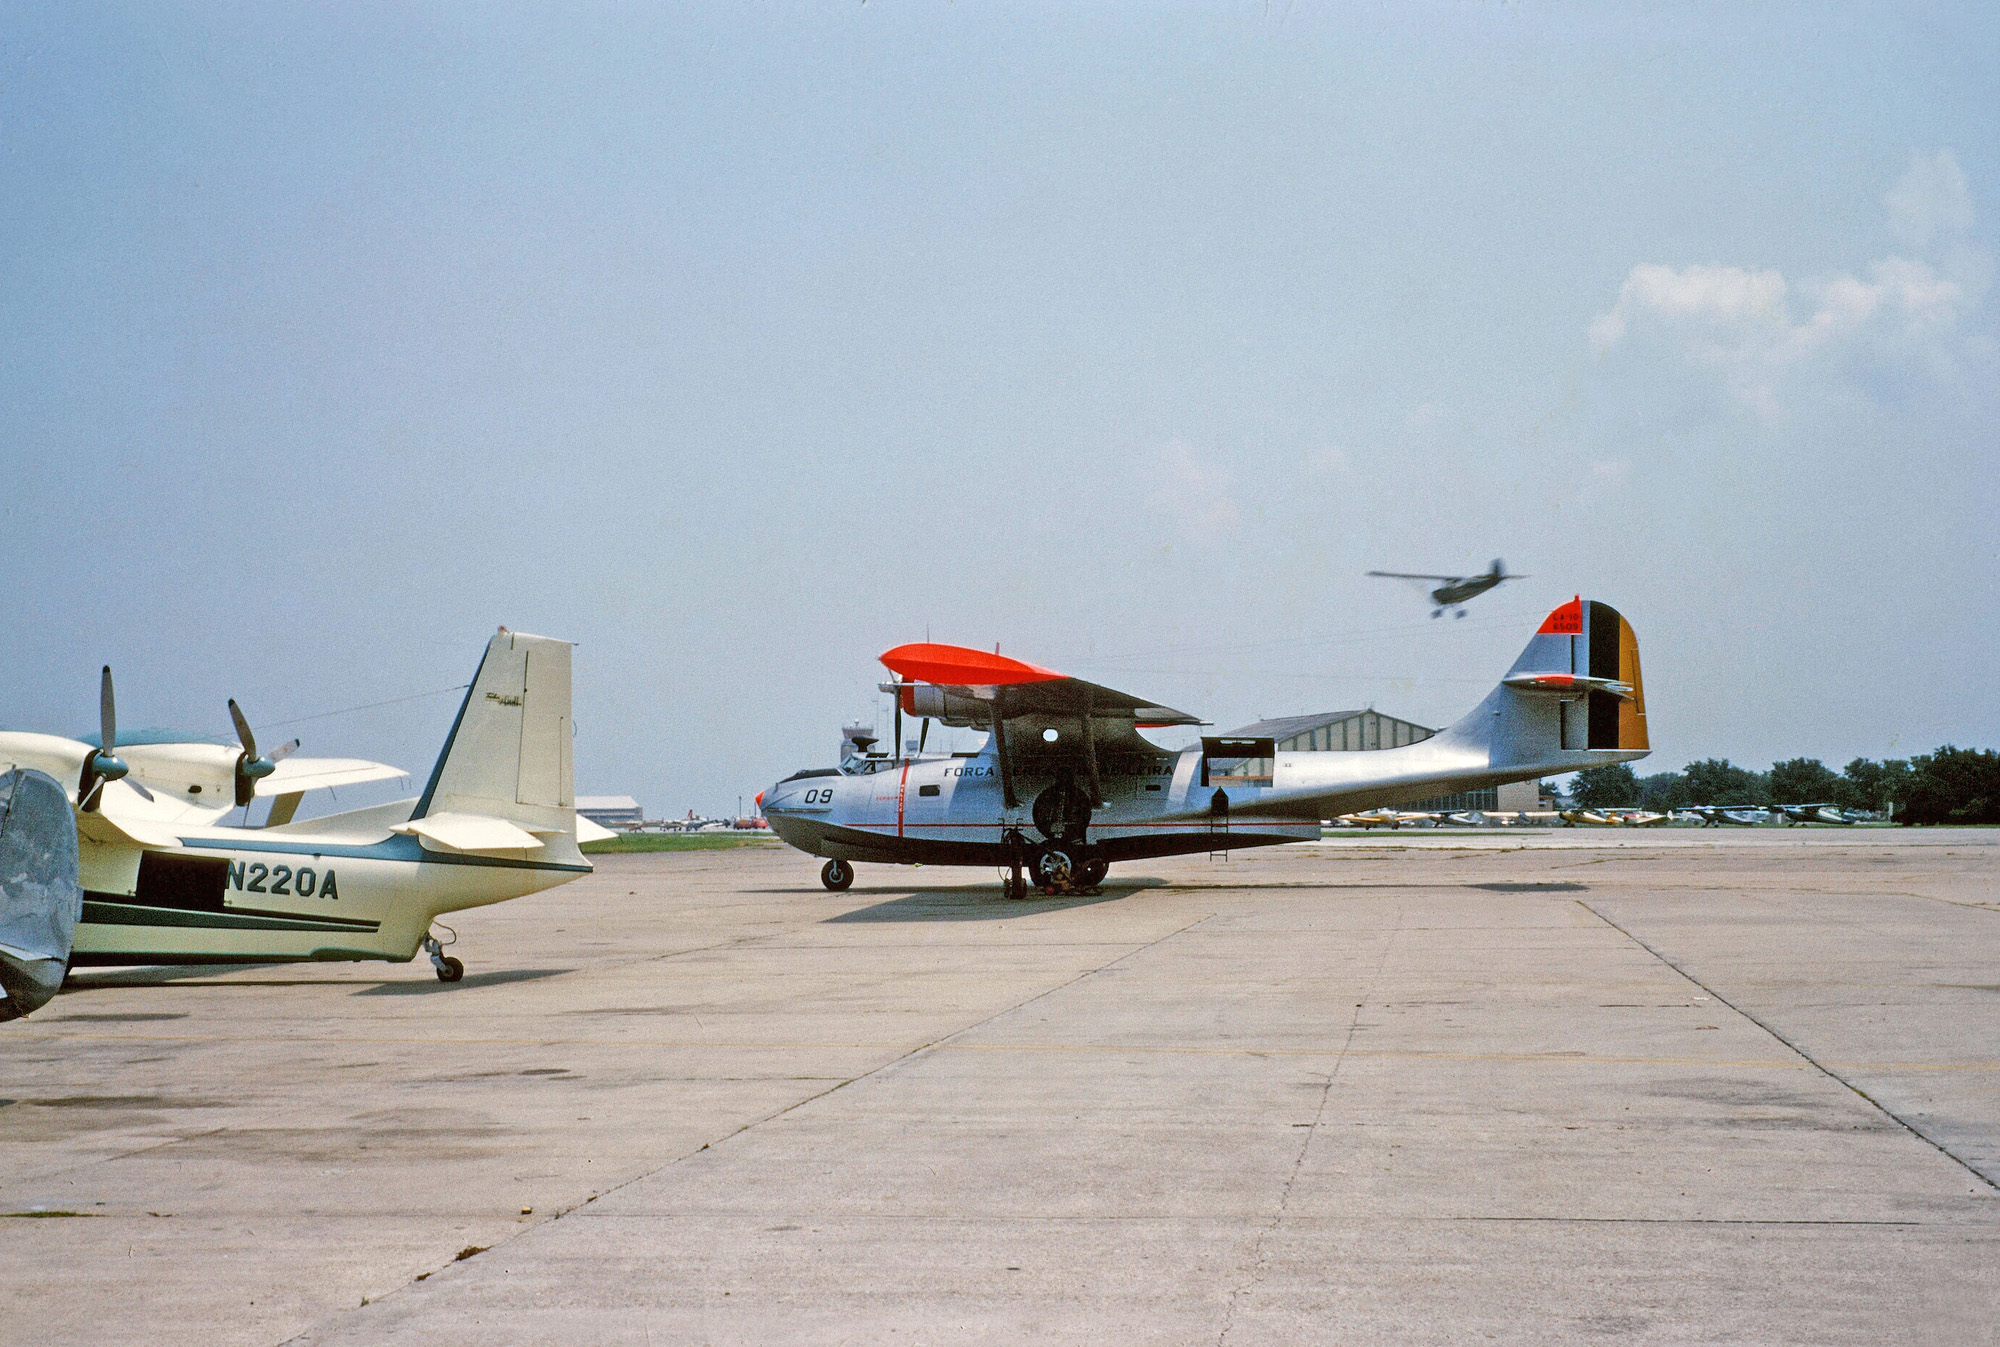 Taken at an unidentified airport where seaplanes were abundant in 1957 or so. I believe the pretty blue and white plane is a Piaggio P-136-L1, dwarfed by a Brazilian Consolidated PBY. View full size.